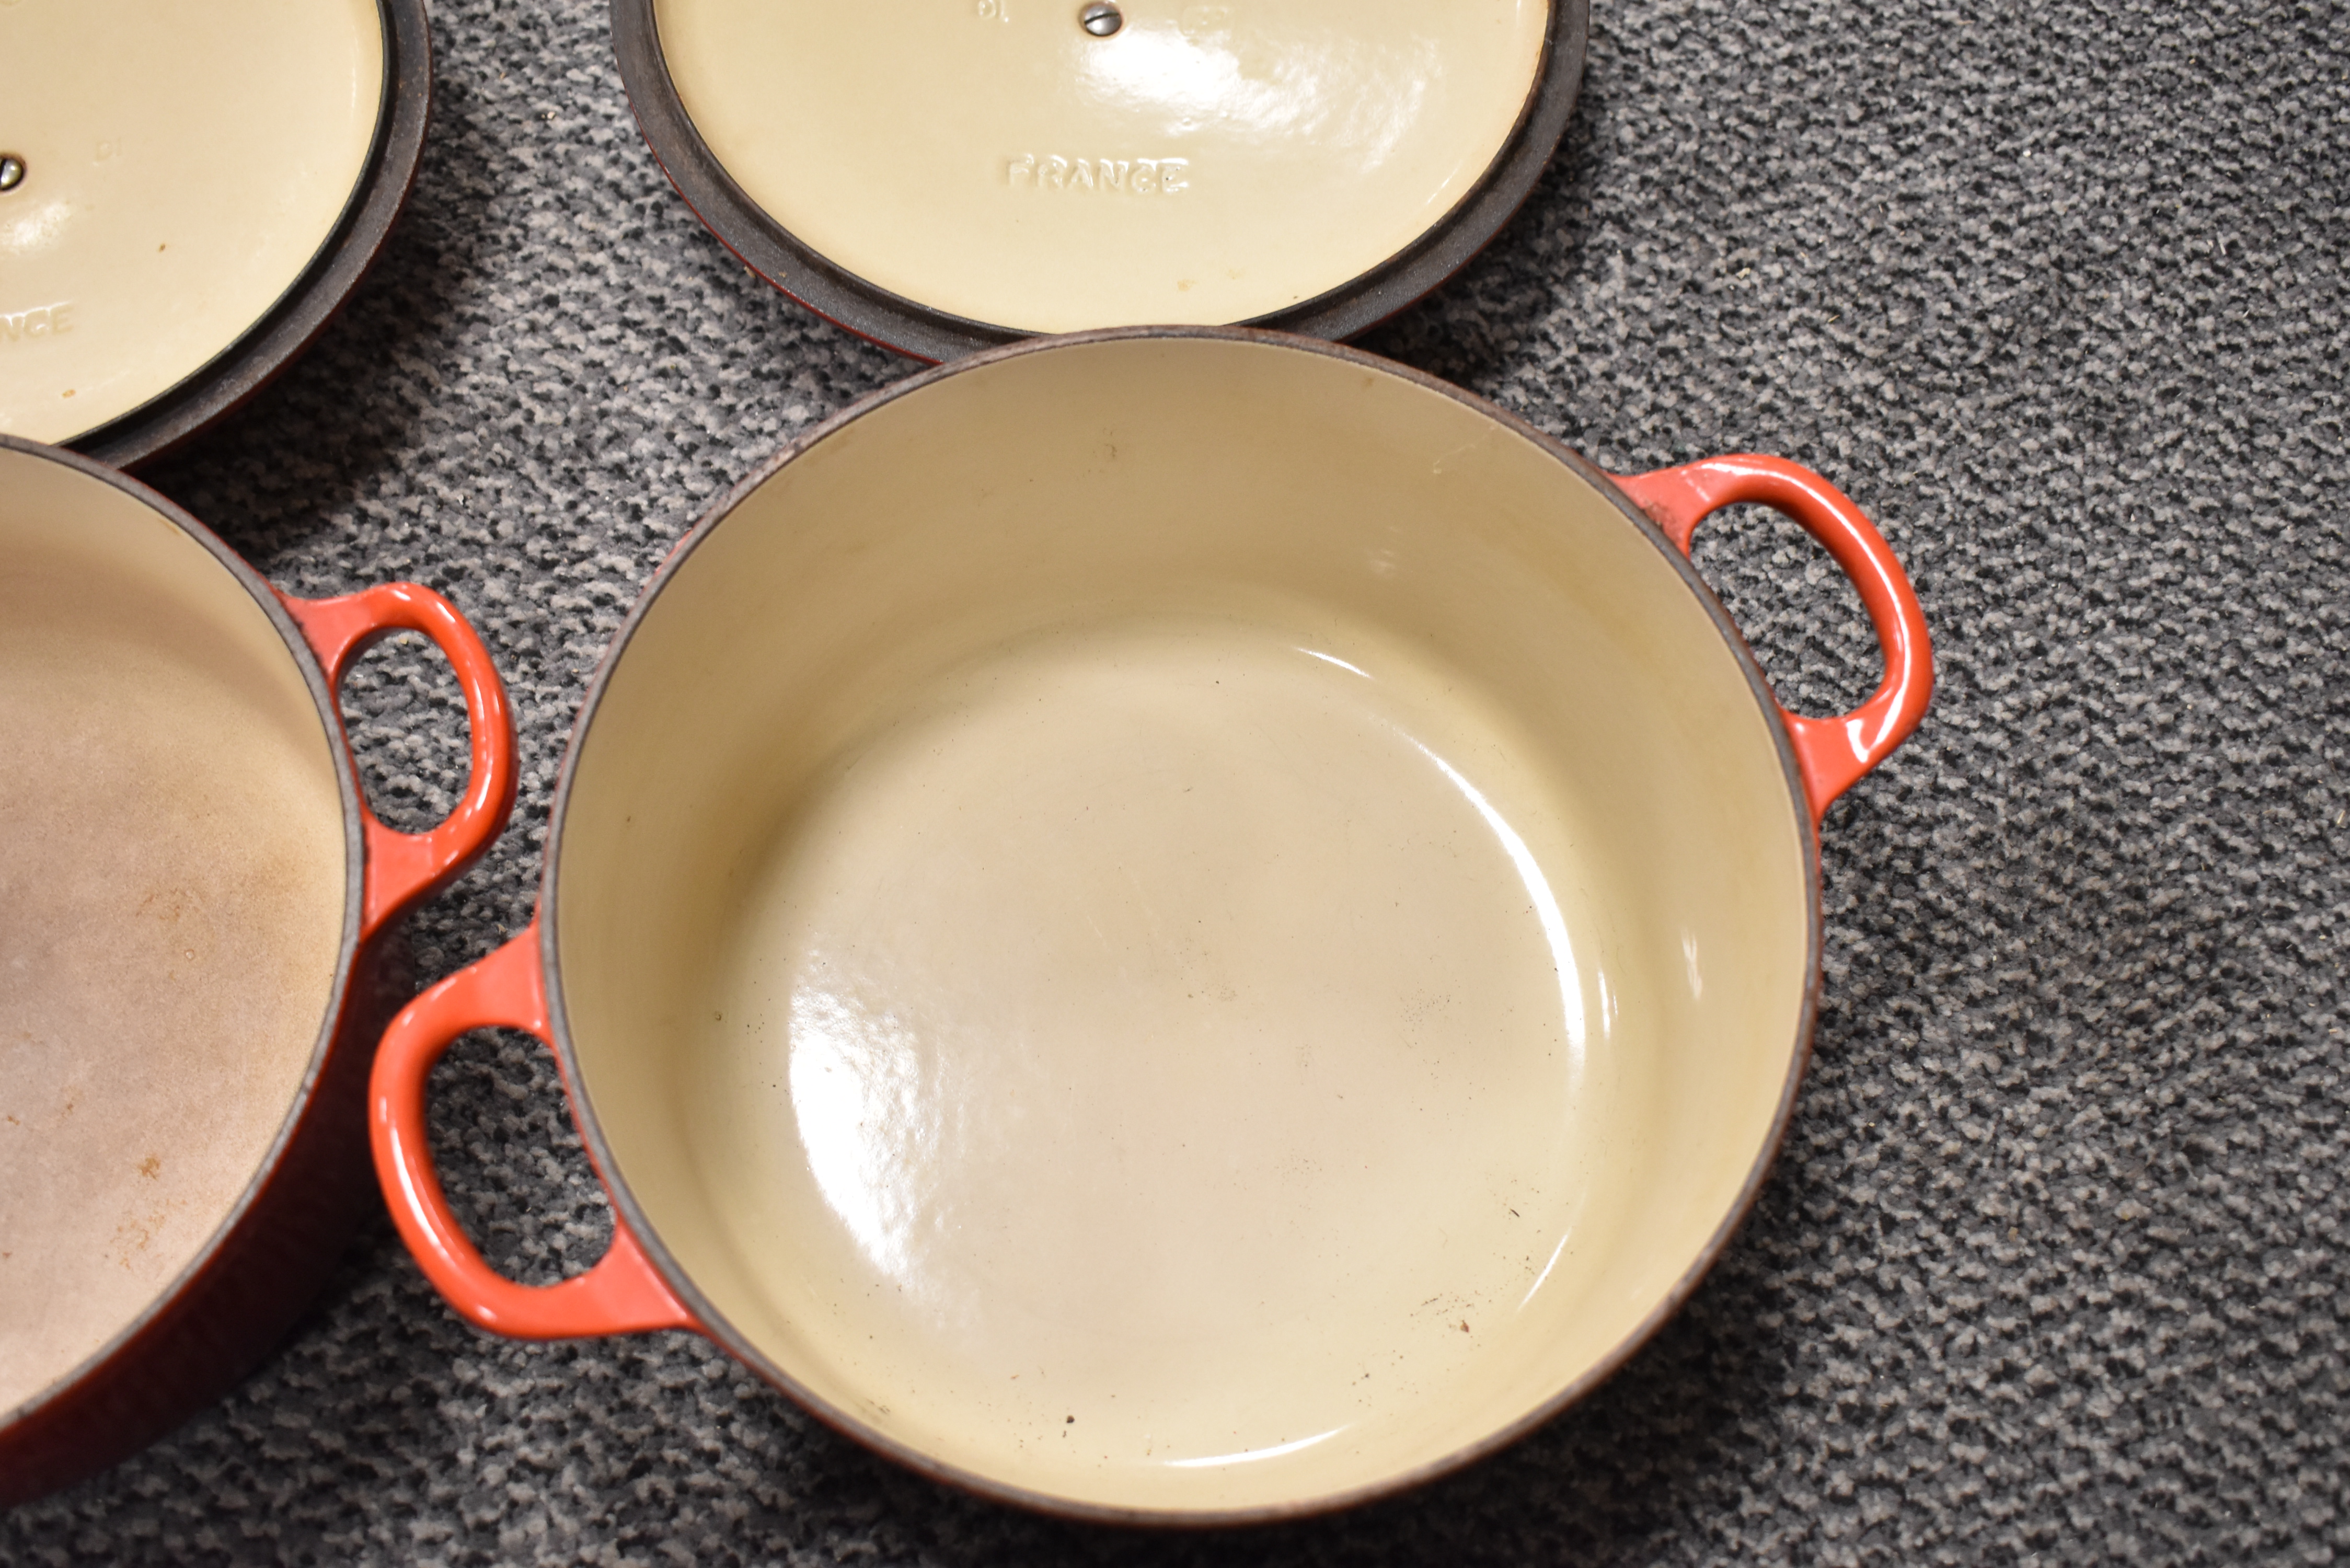 Two Le Creuset casserole dishes in red enamel, both used but in good condition. - Image 3 of 3